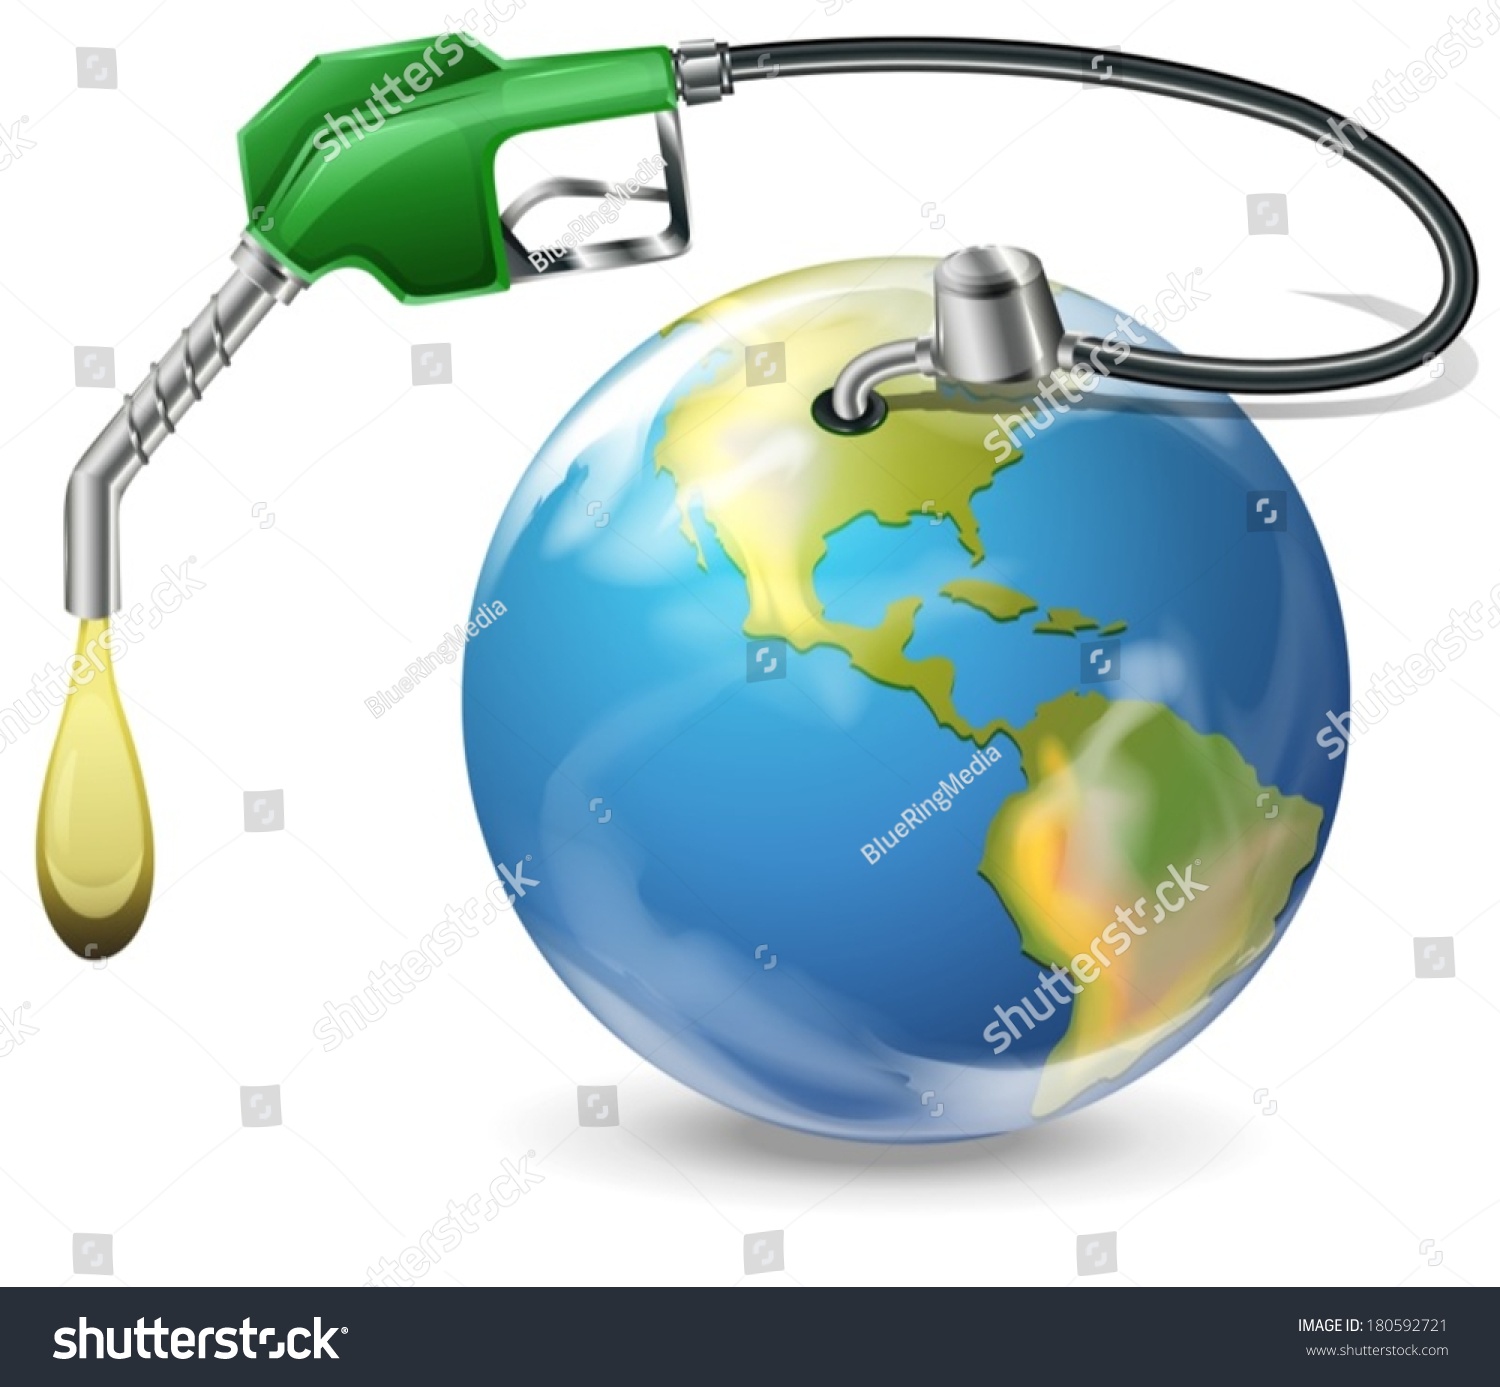 SVG of Illustration of a petrol pump and a globe on a white background svg